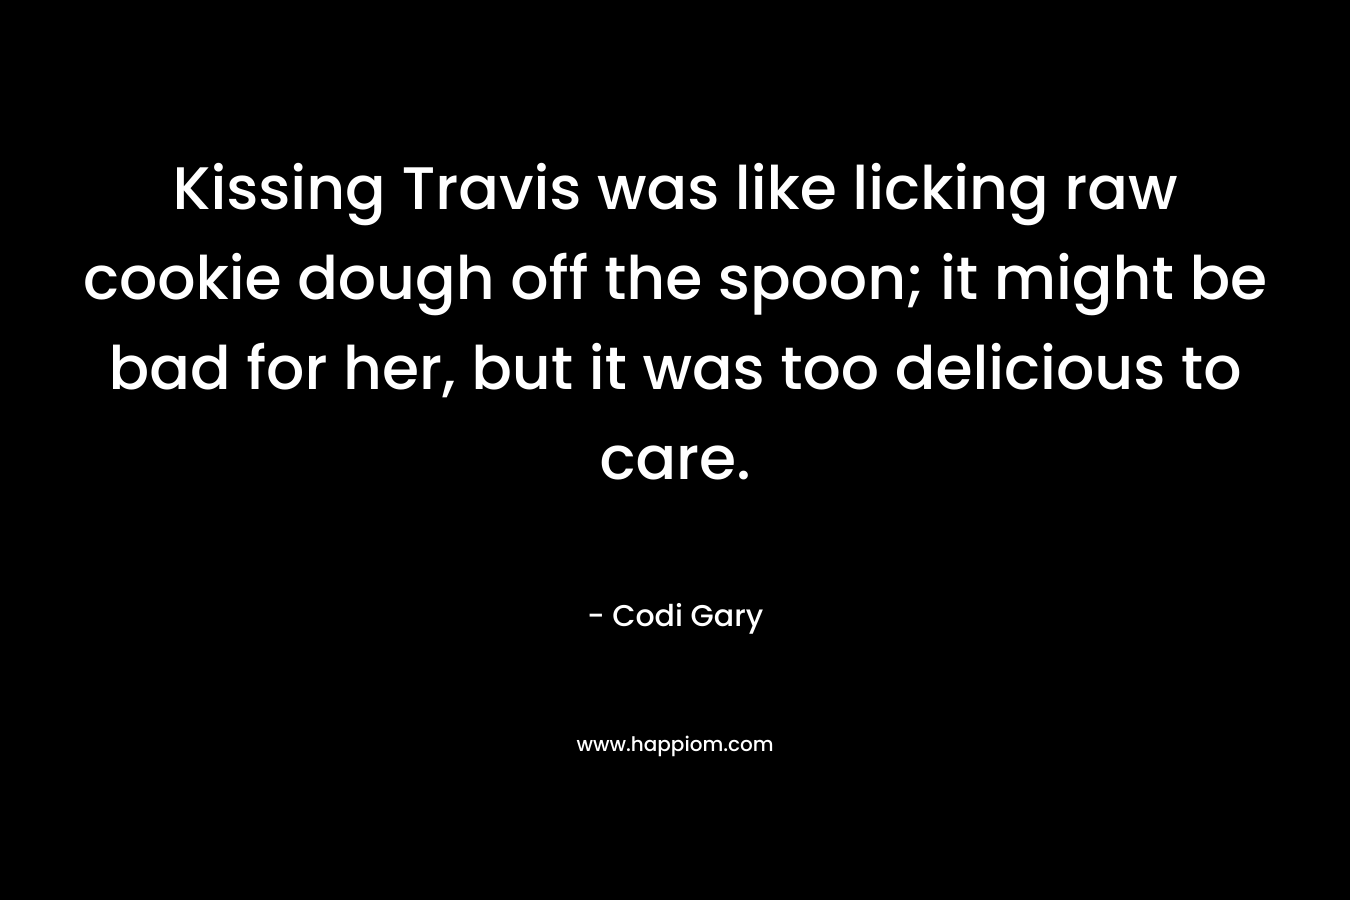 Kissing Travis was like licking raw cookie dough off the spoon; it might be bad for her, but it was too delicious to care. – Codi Gary